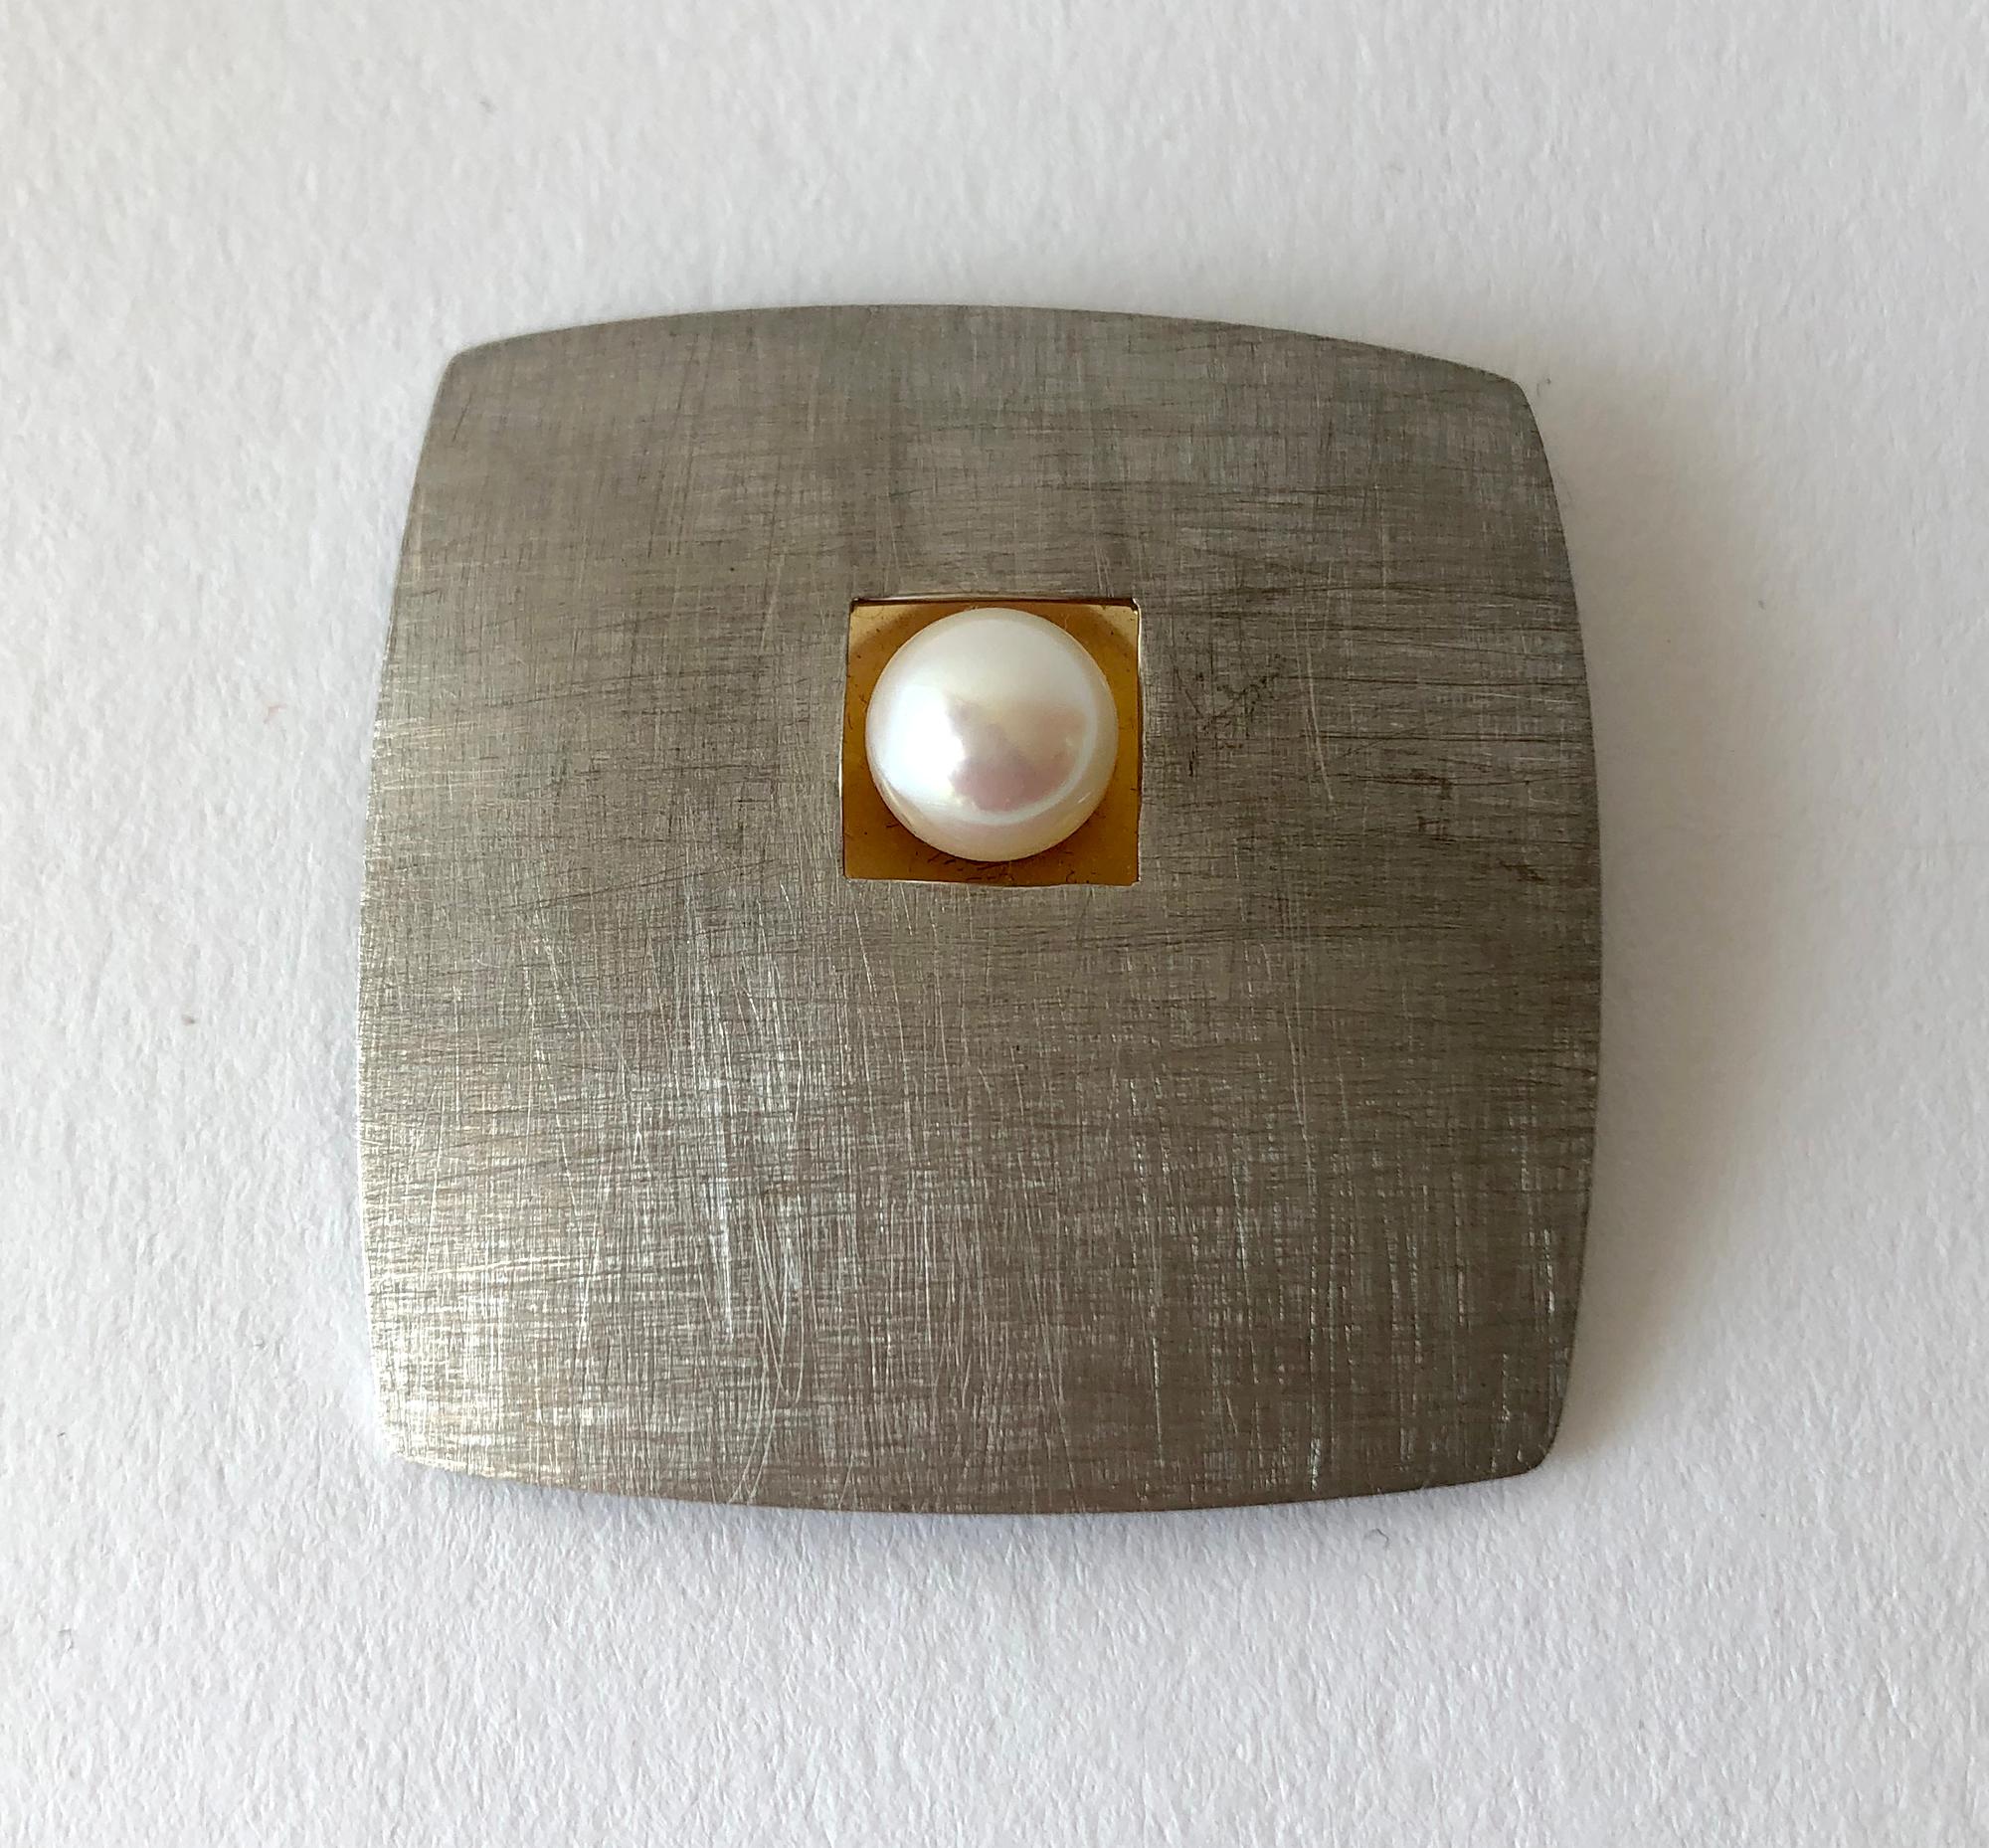 Ball Cut 1980s 18K Textured White Yellow Gold Brooch Pendant with Pearl